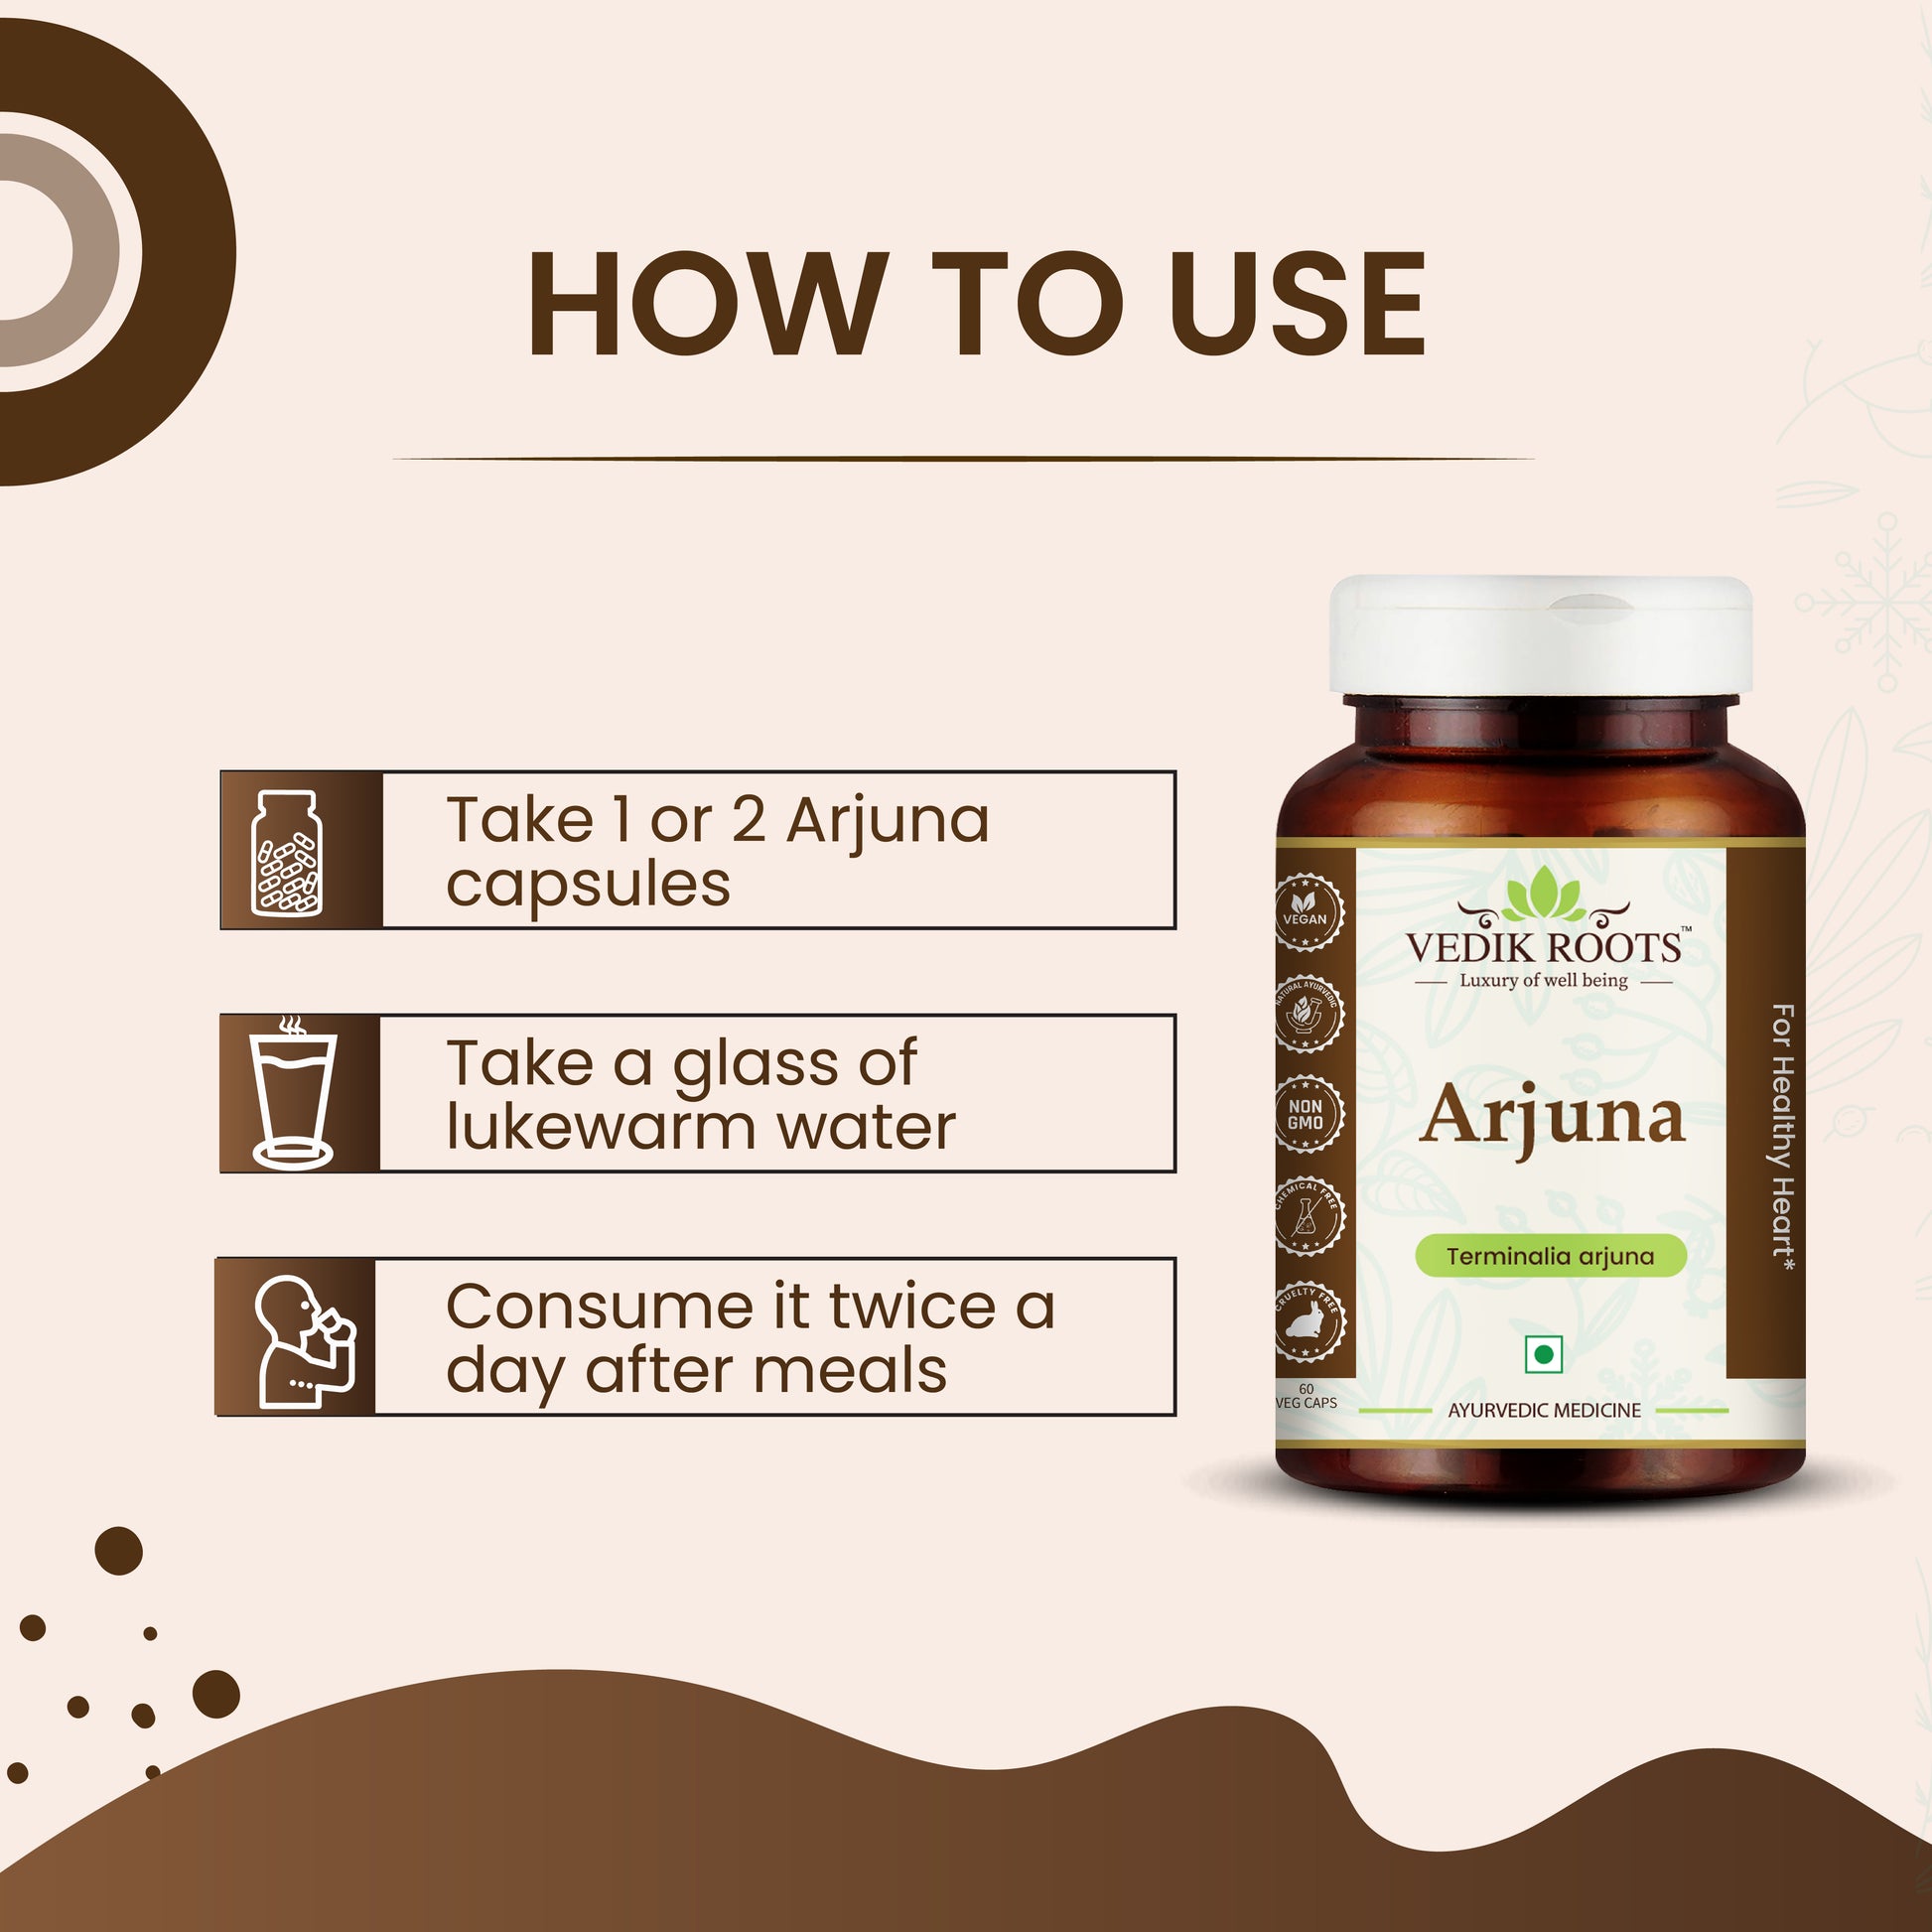 Buy Arjuna Products Online in India